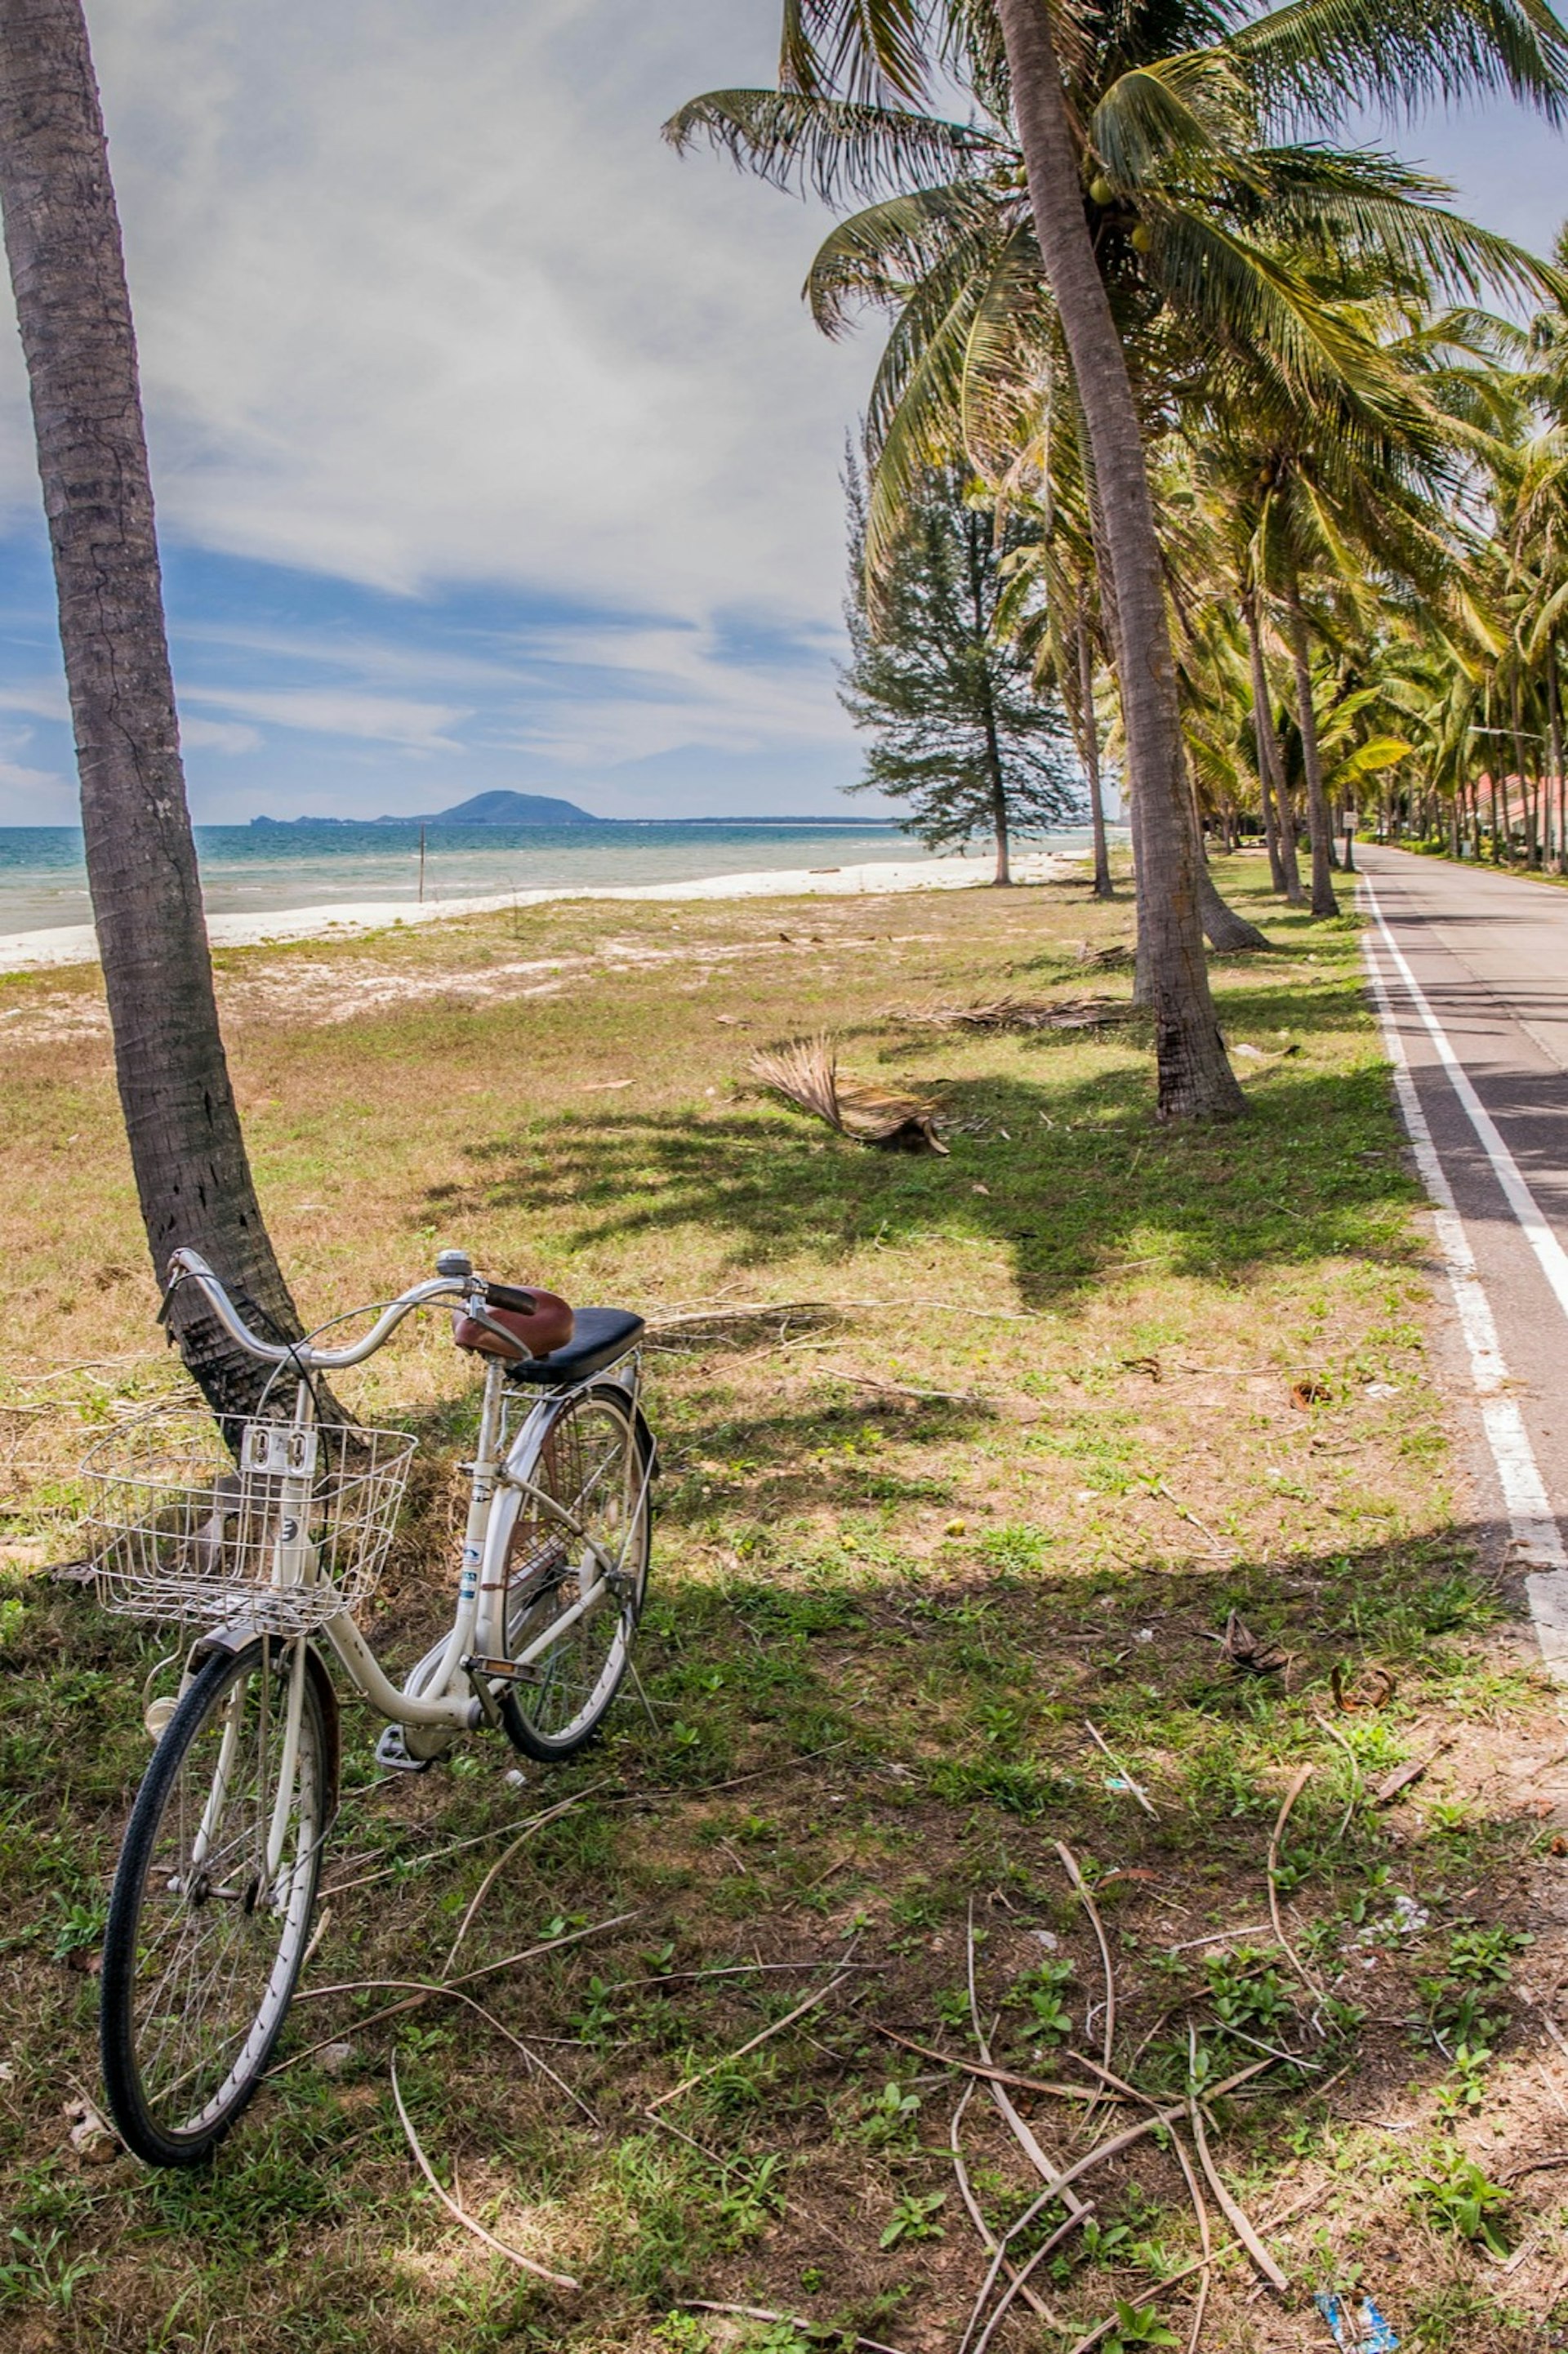 A bicycle is parked next to a palm tree on the beach